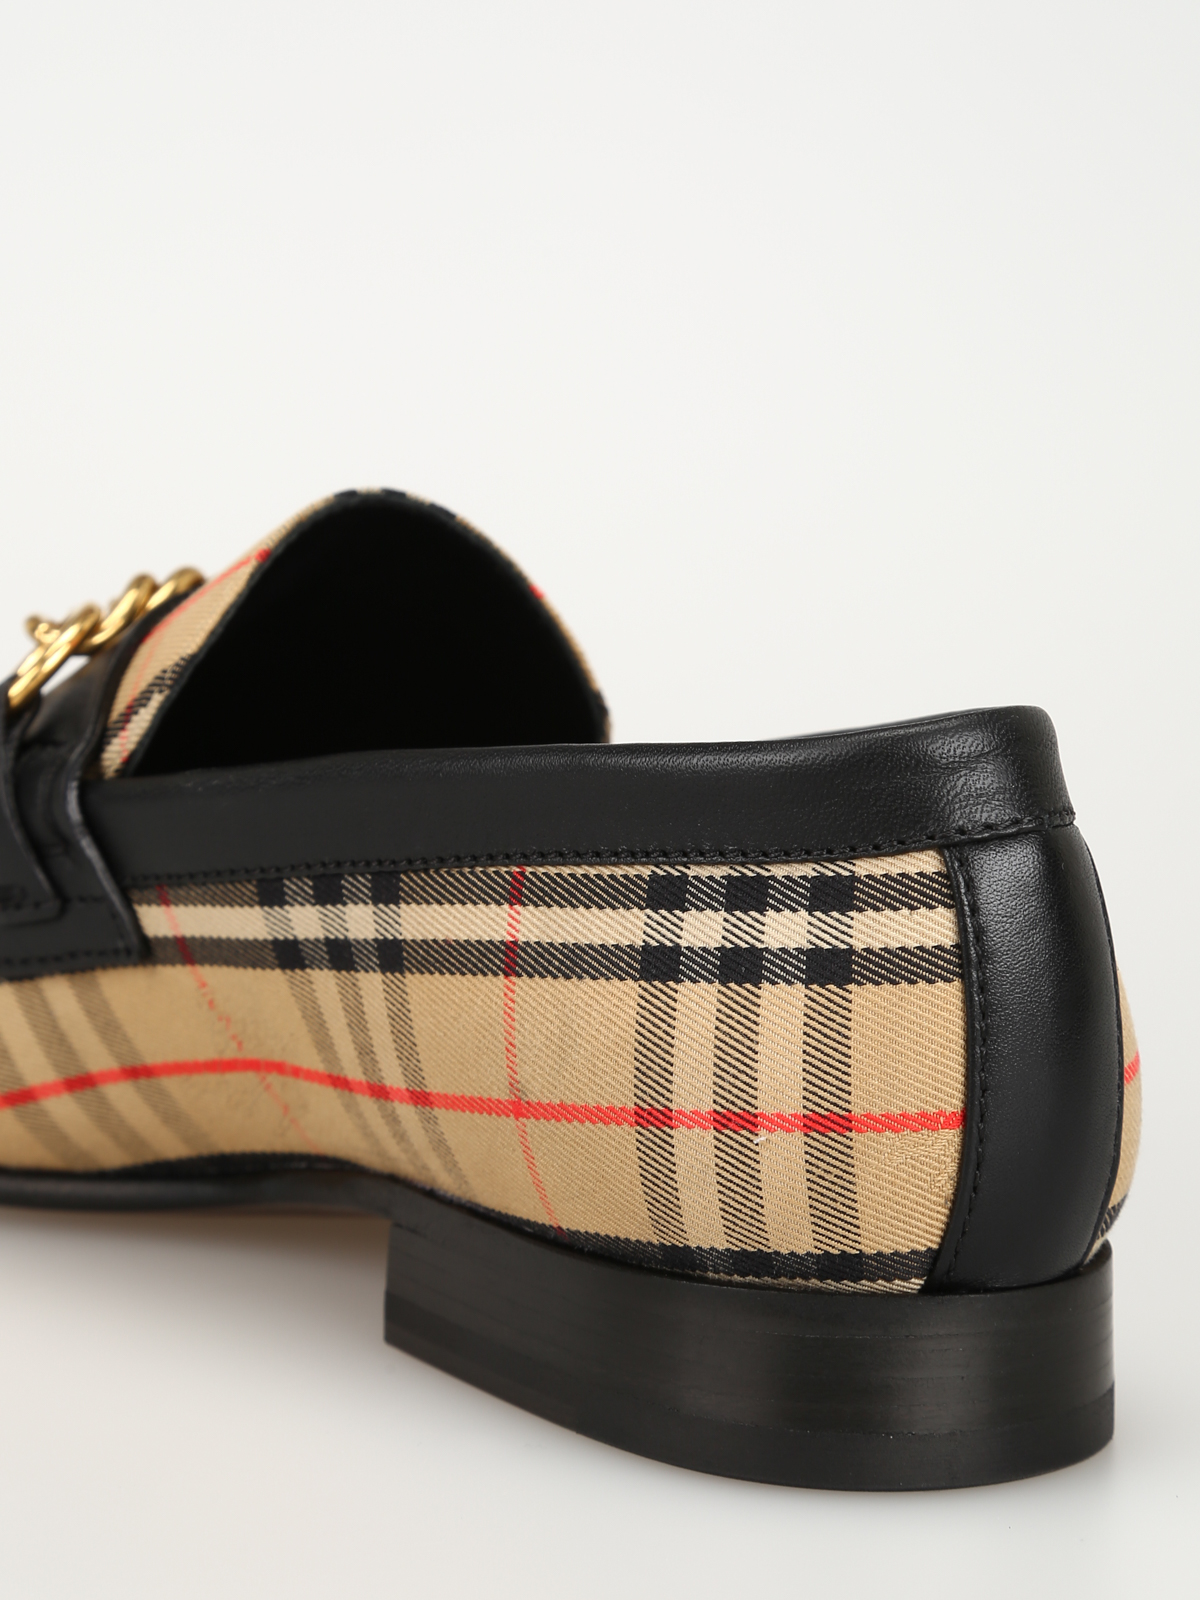 Loafers & Slippers Burberry - The Link Vintage Check loafers - 8007077